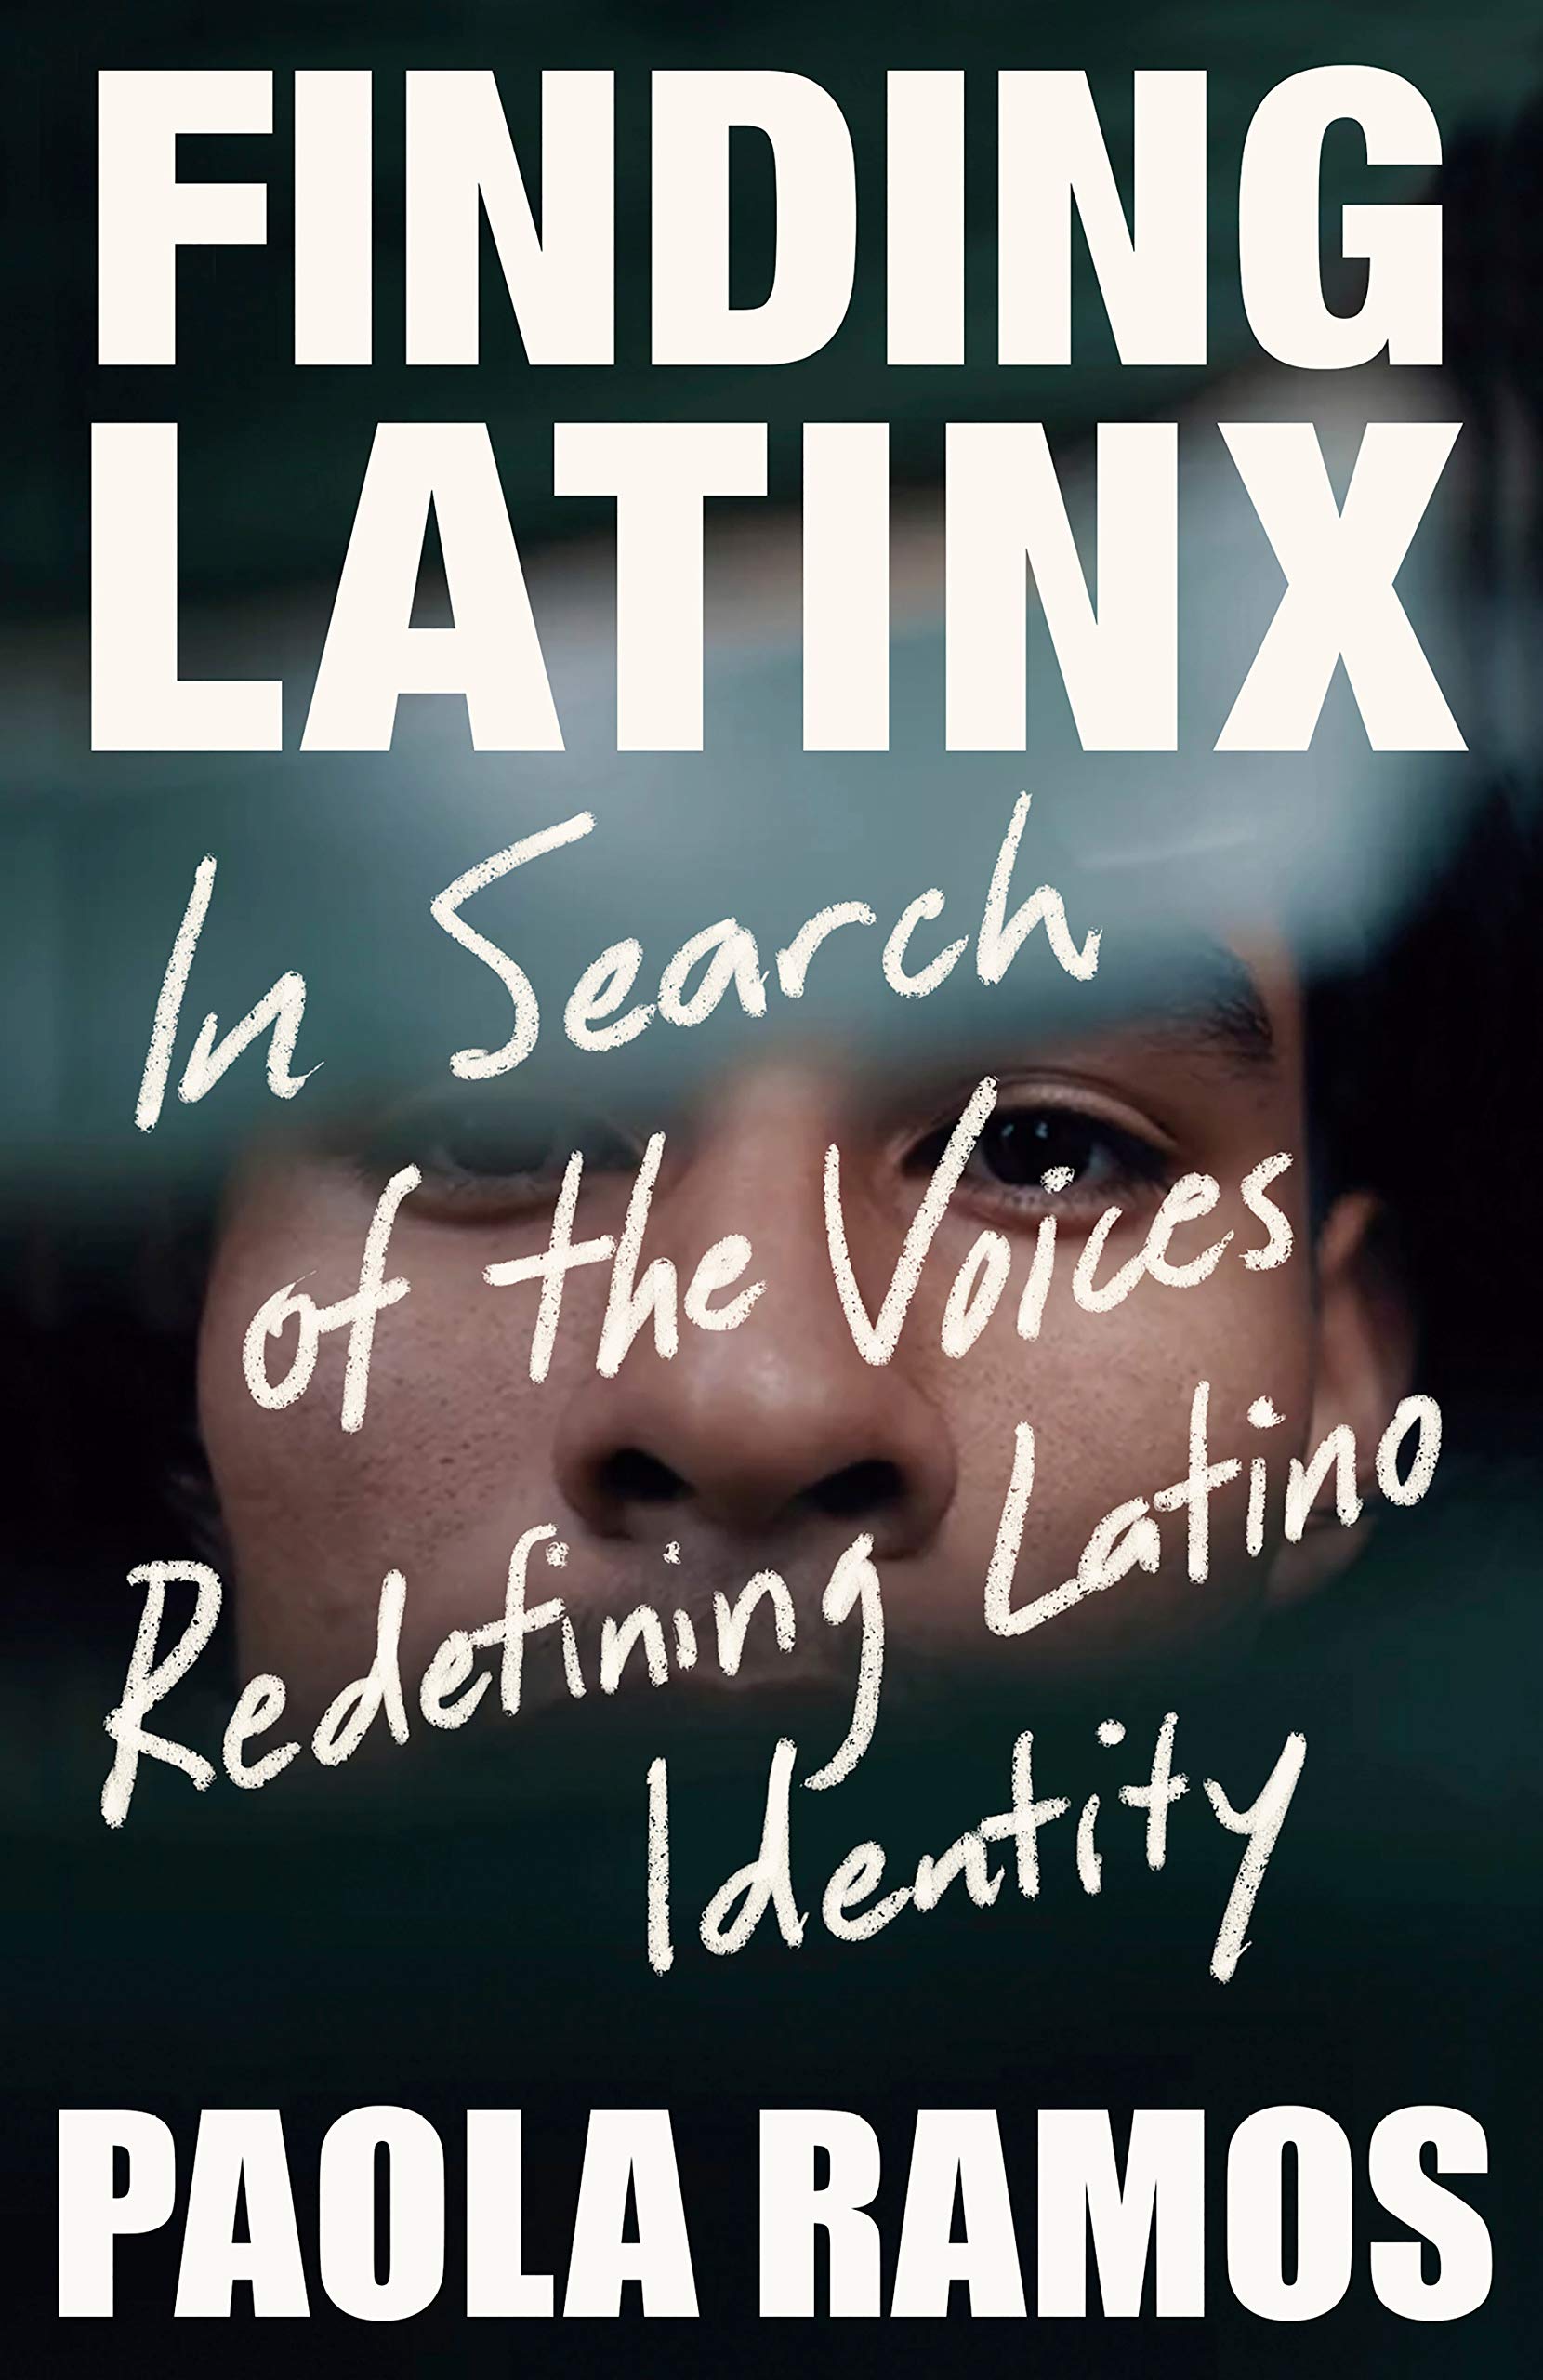 Image for "Finding Latinx"